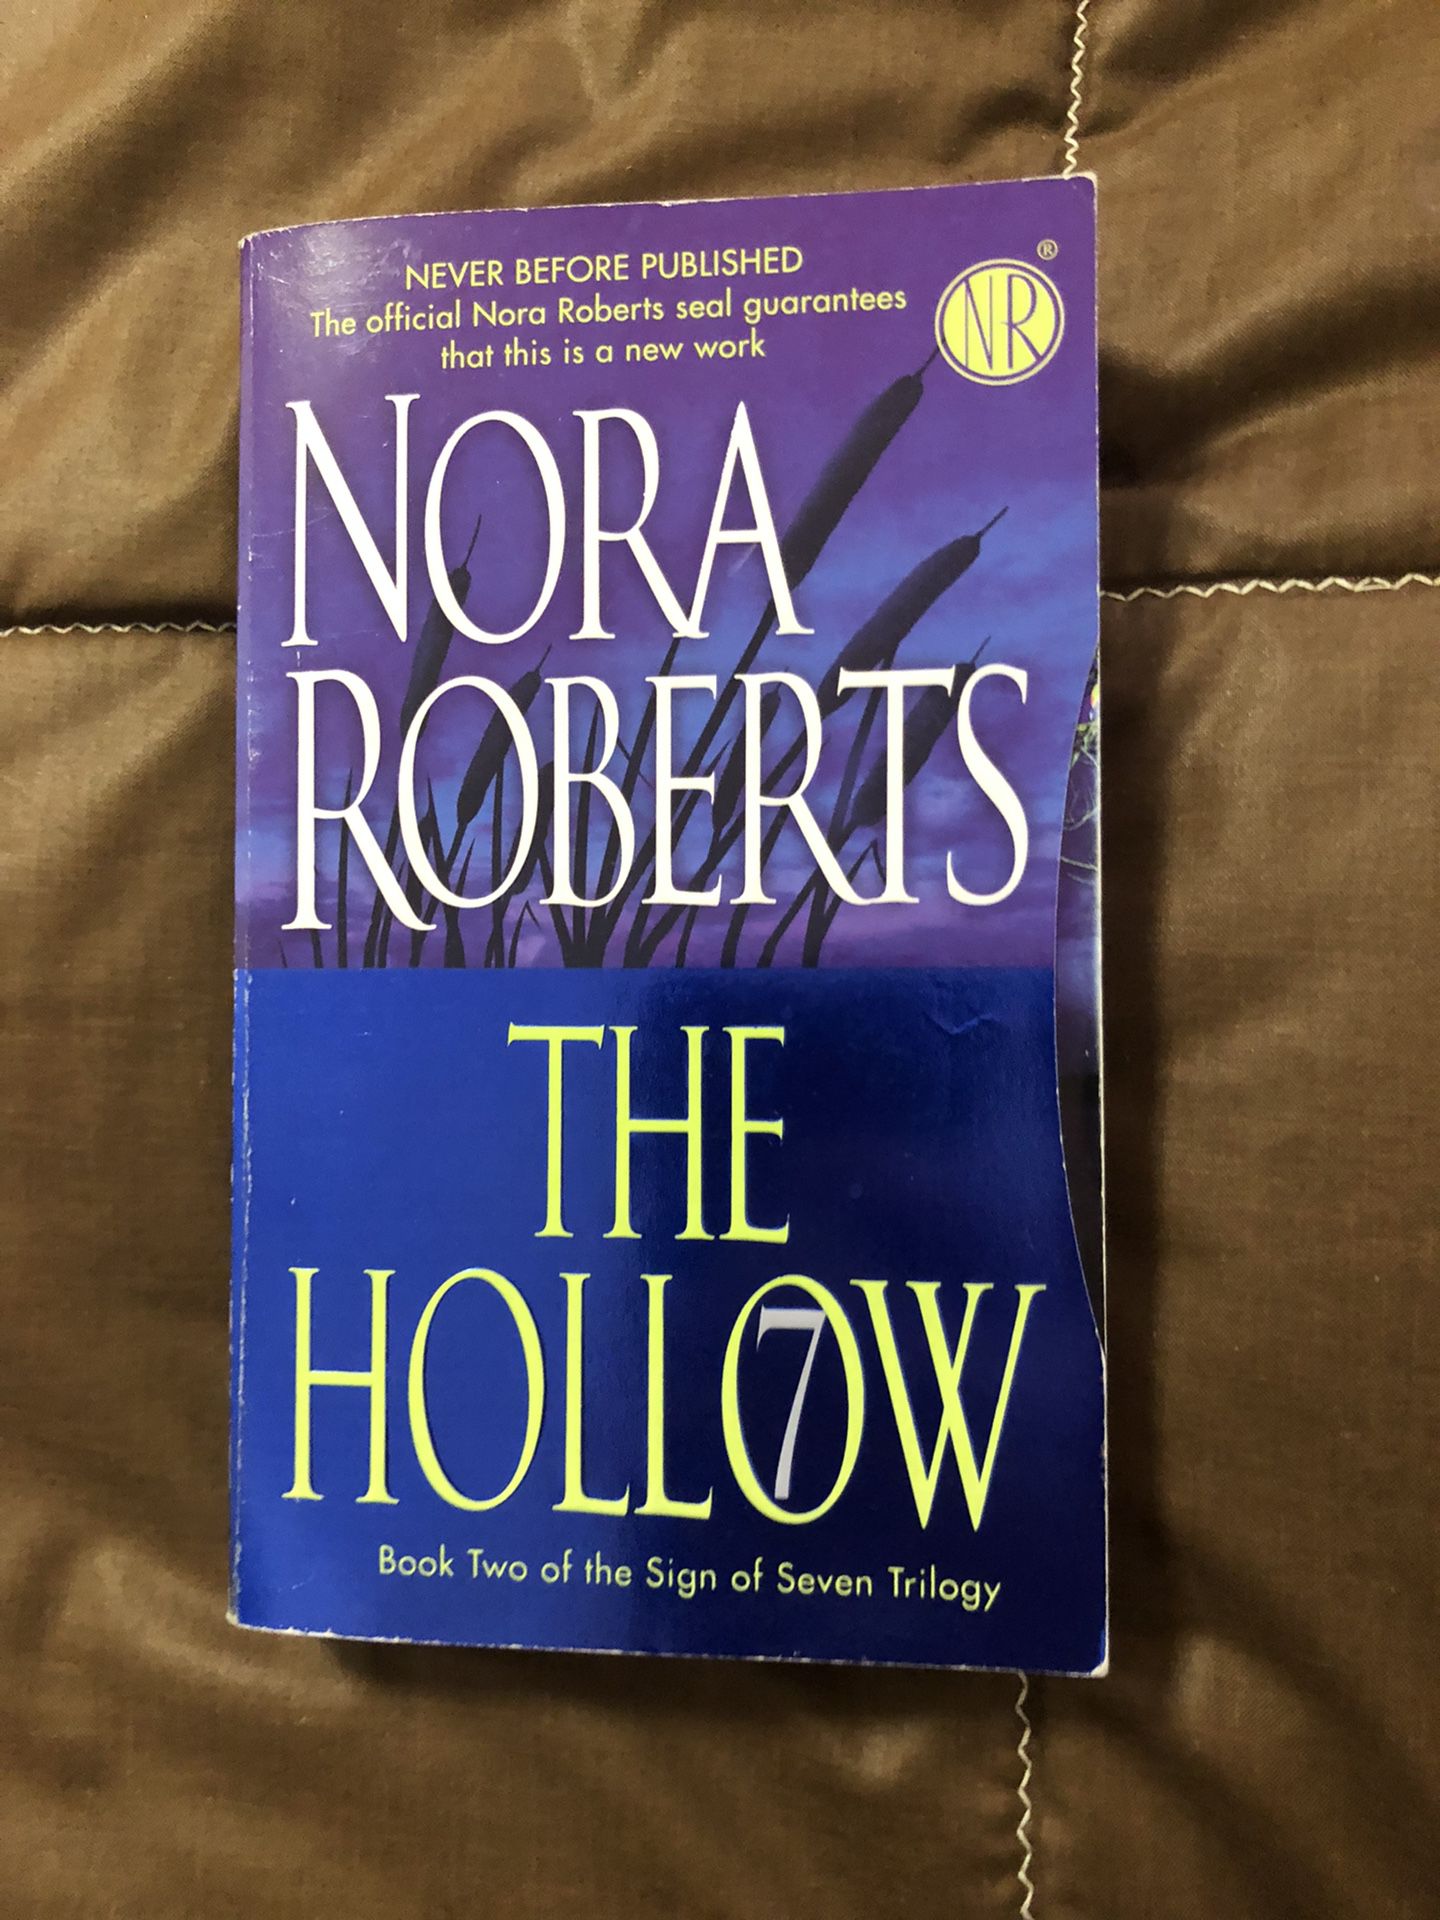 The Hollow by Nora Roberts (paperback)